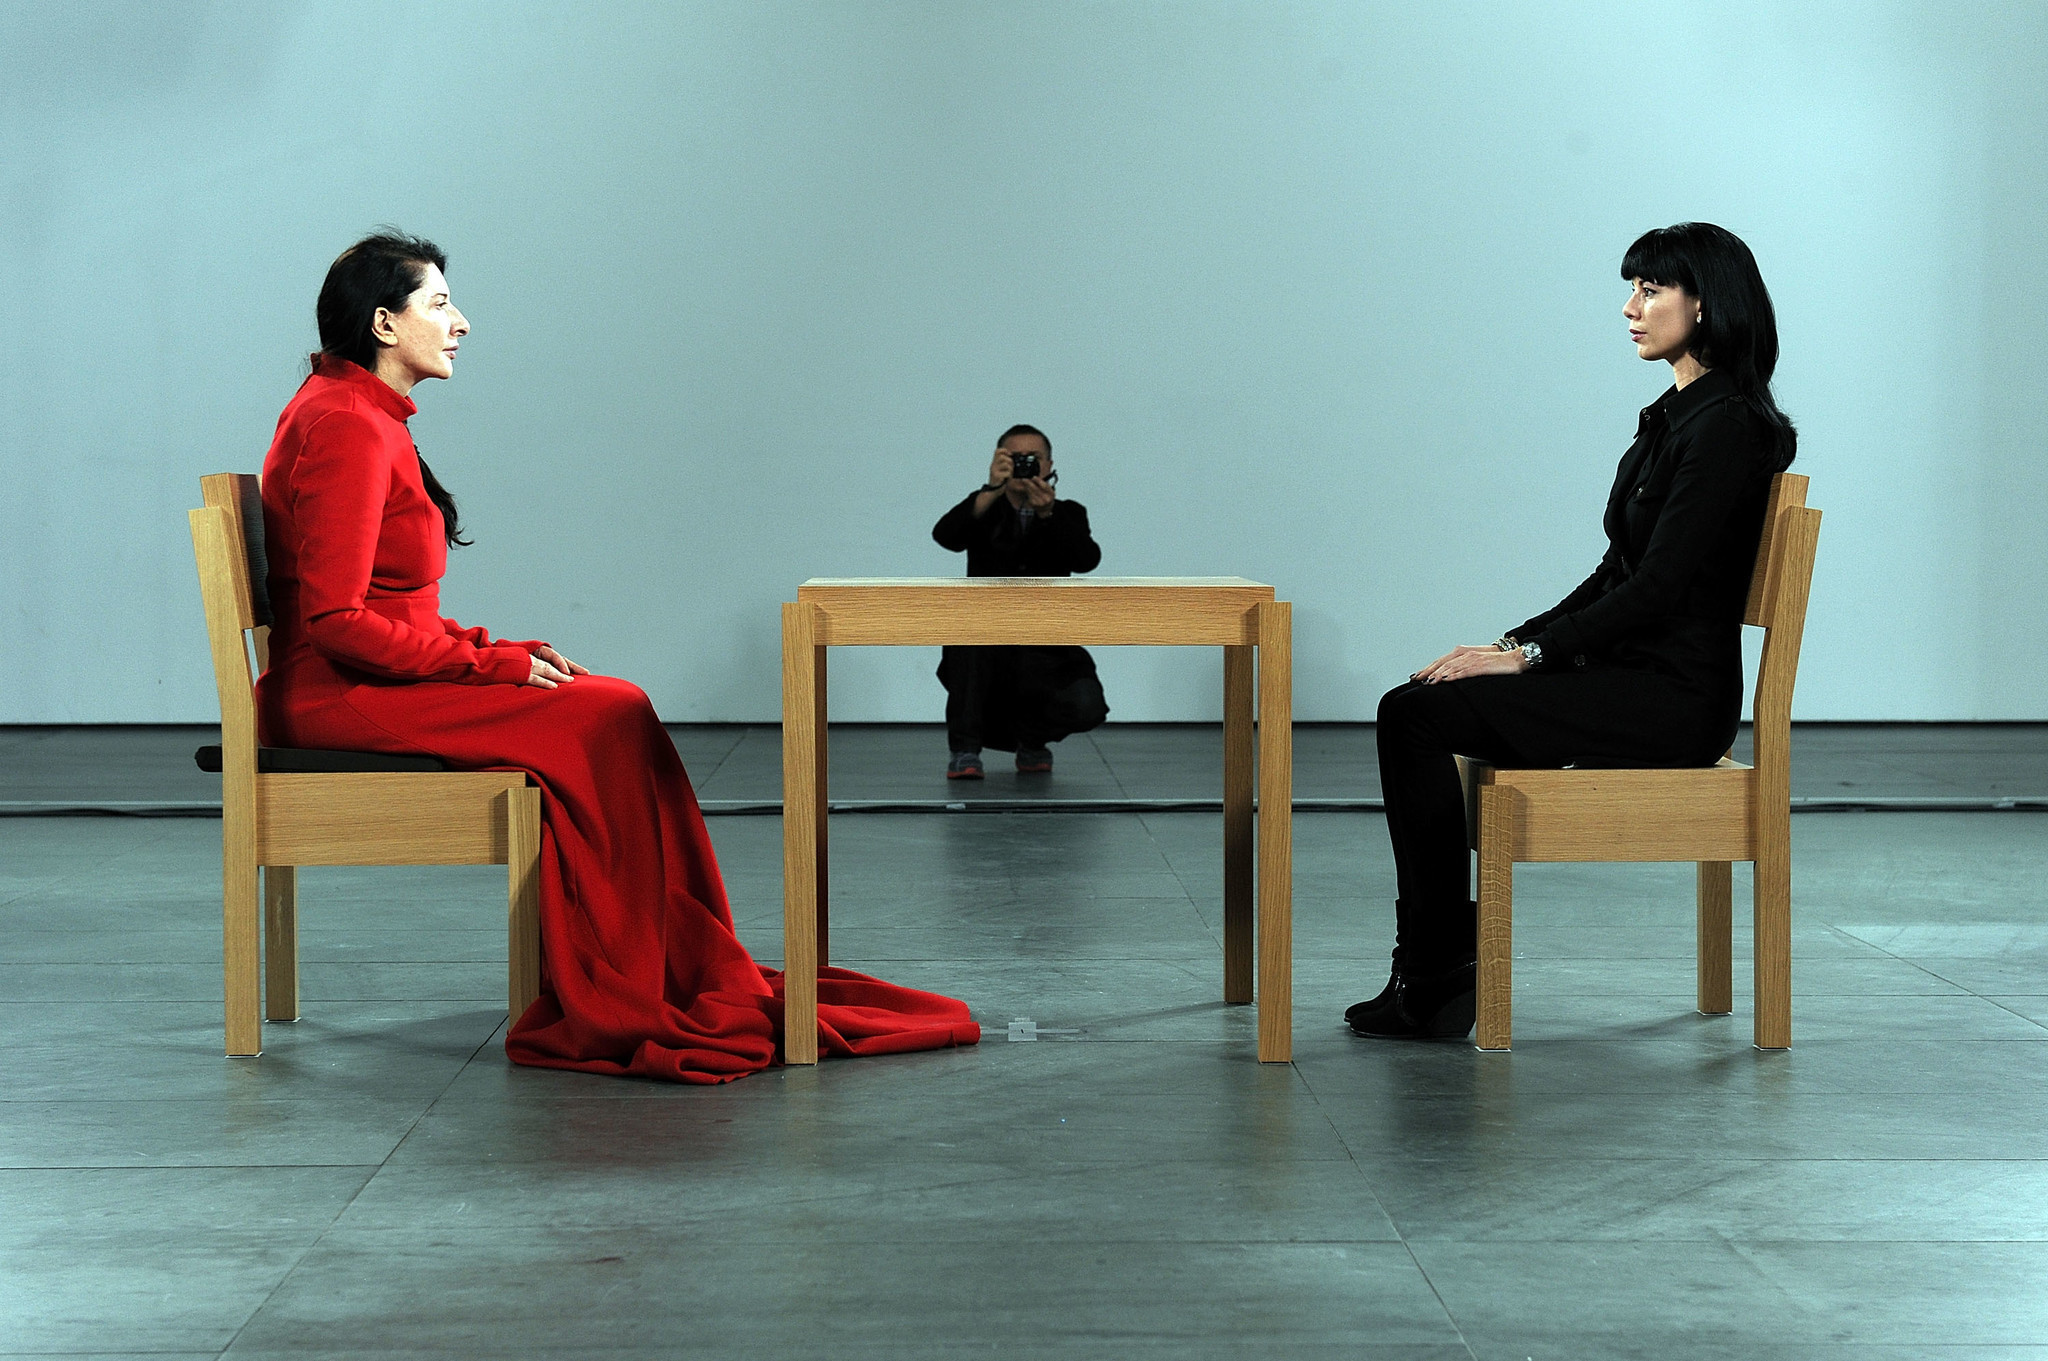 How Marina Abramovic's memoir does and doesn't illuminate the ... - Los Angeles Times